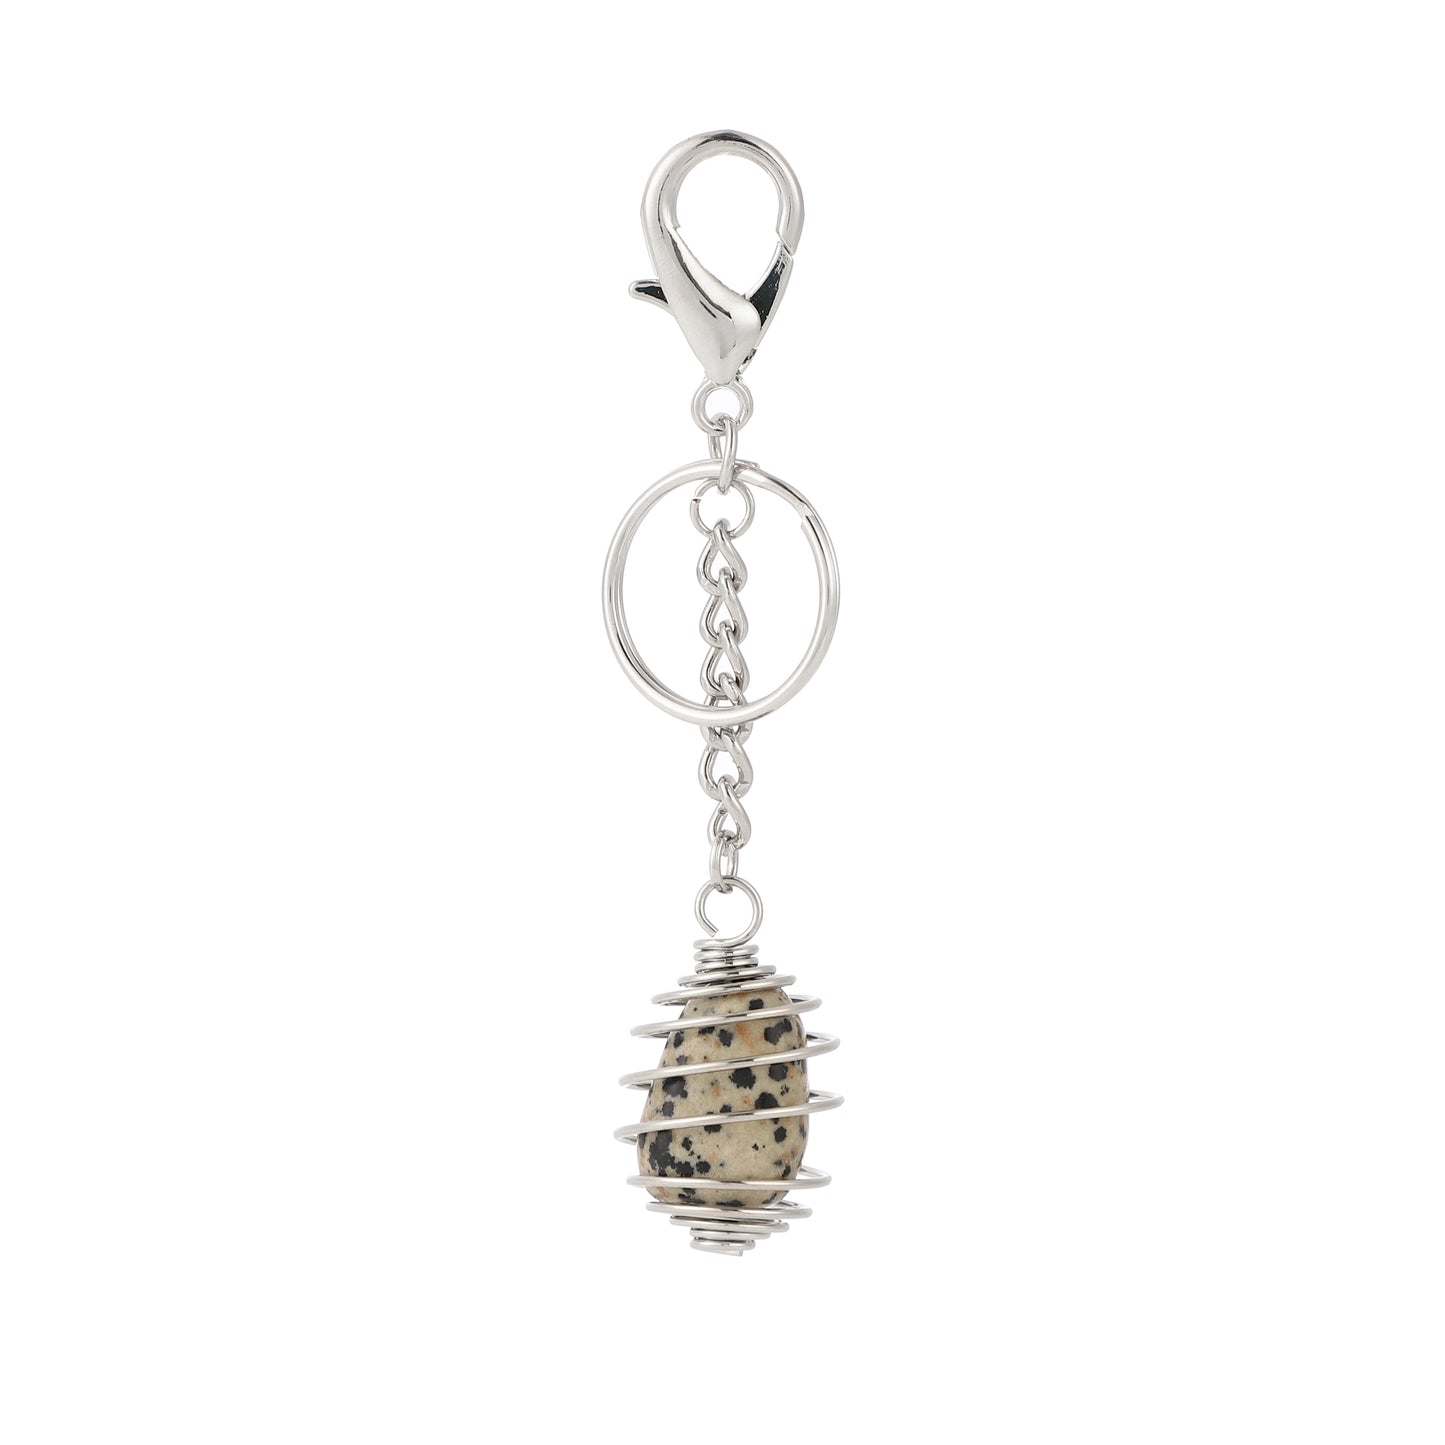 Cage Keychain - Stylish and Functional Accessories for Women and Men